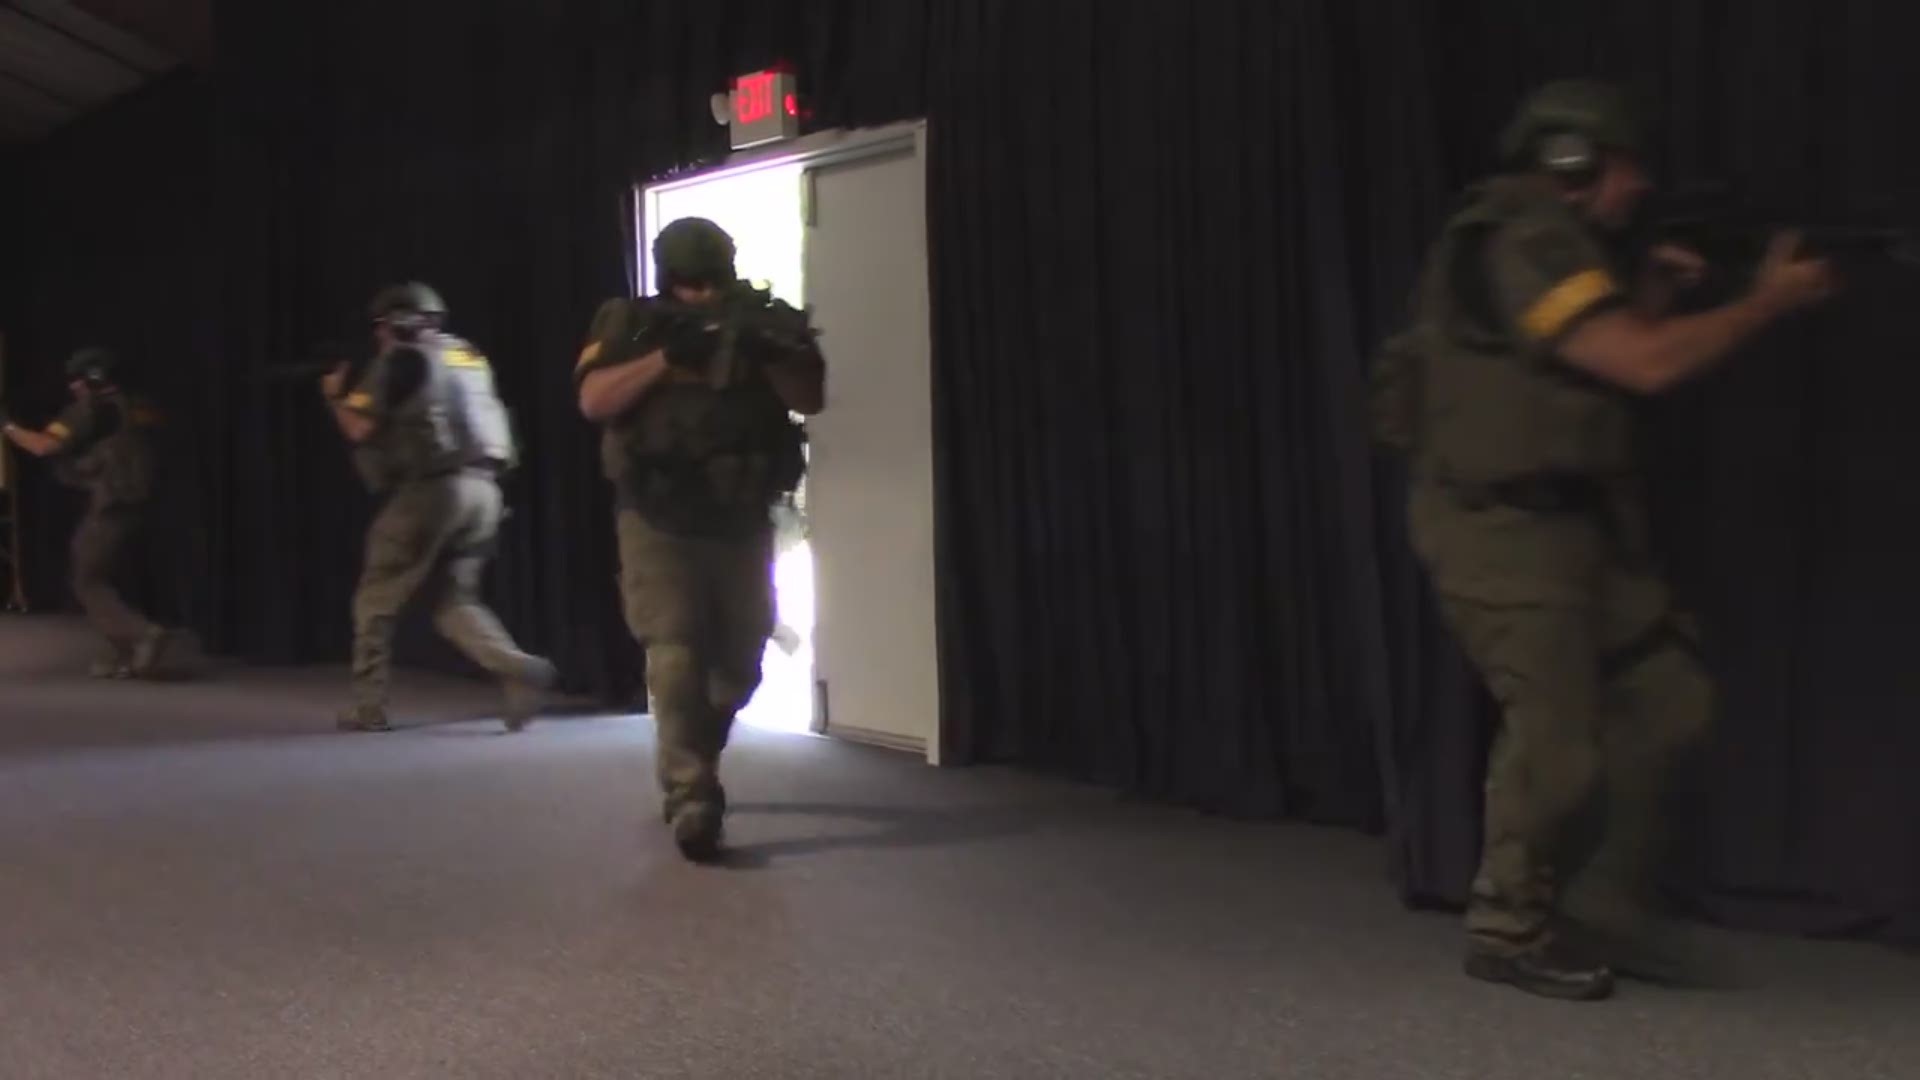 The KCSO had some fun showing off their skills in this video!